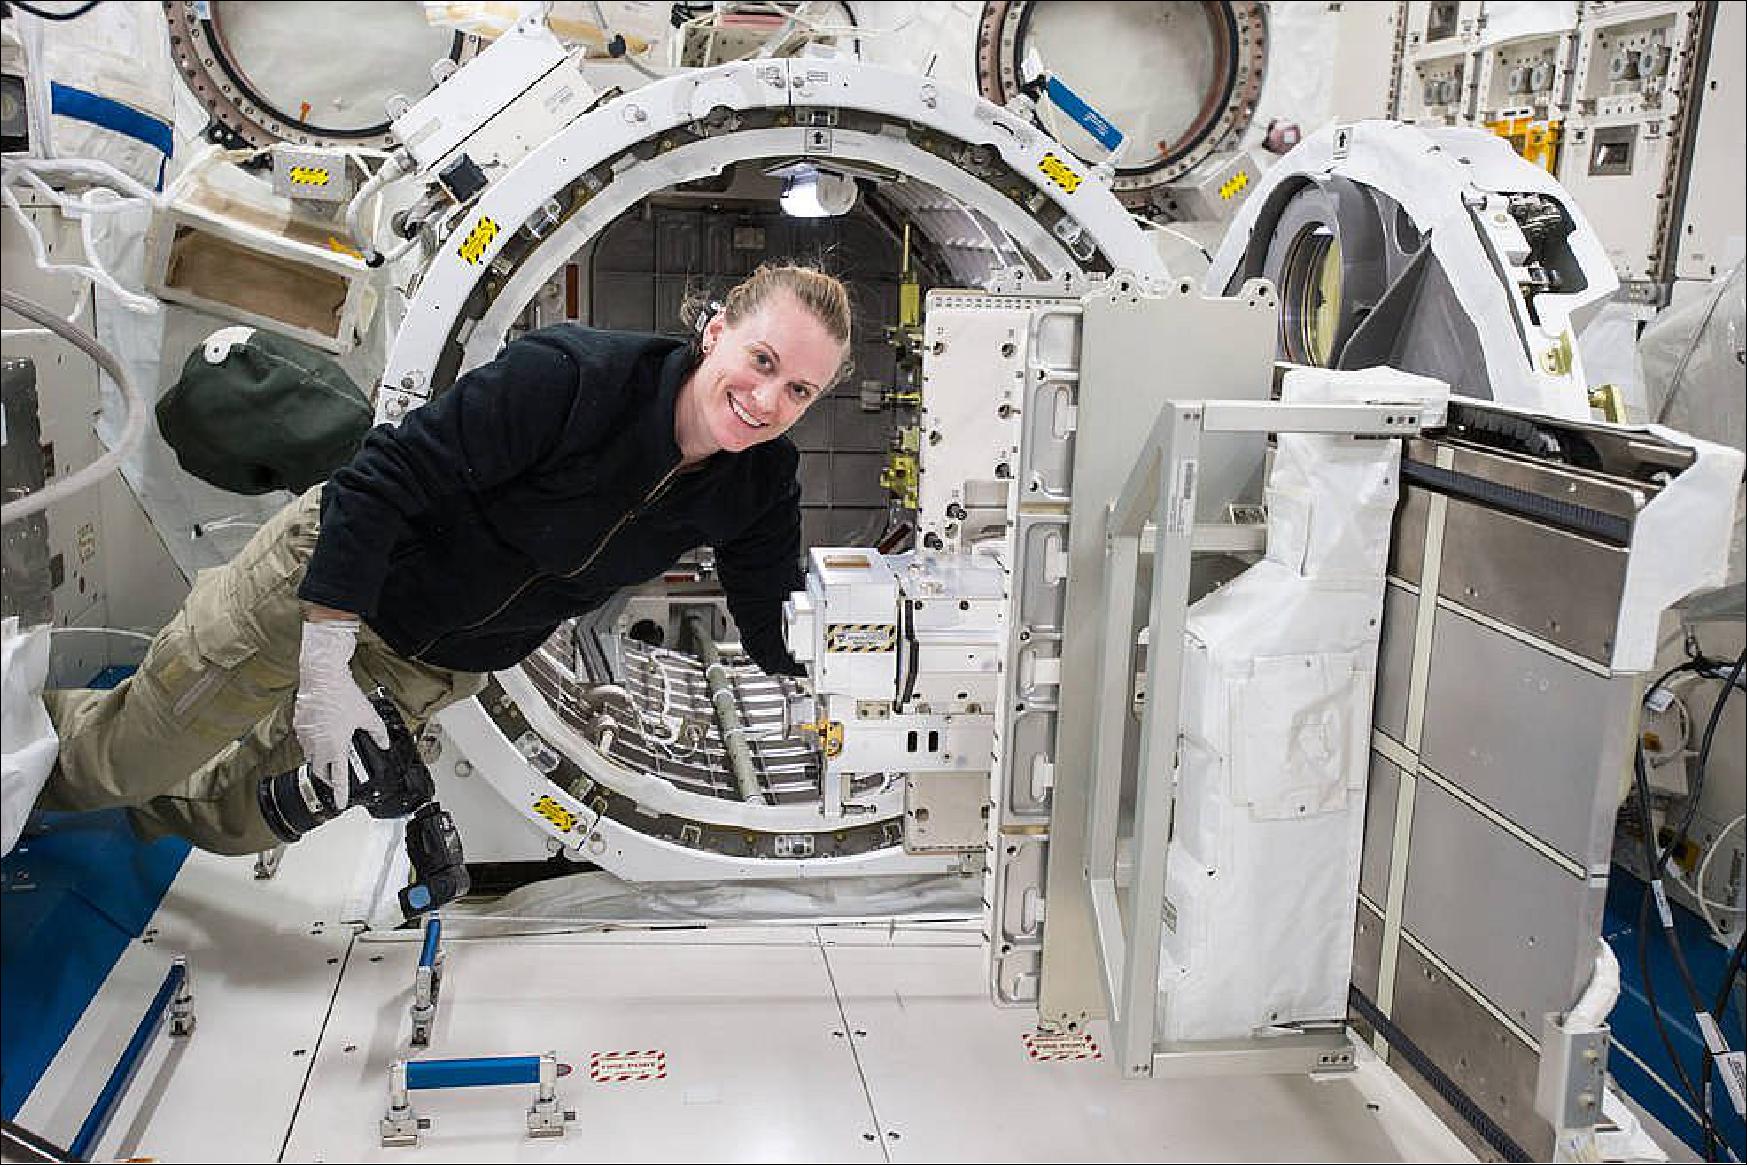 Figure 9: Astronaut Kate Rubins loading the Robotic External Leak Locator for deployment into space (image credit: NASA)